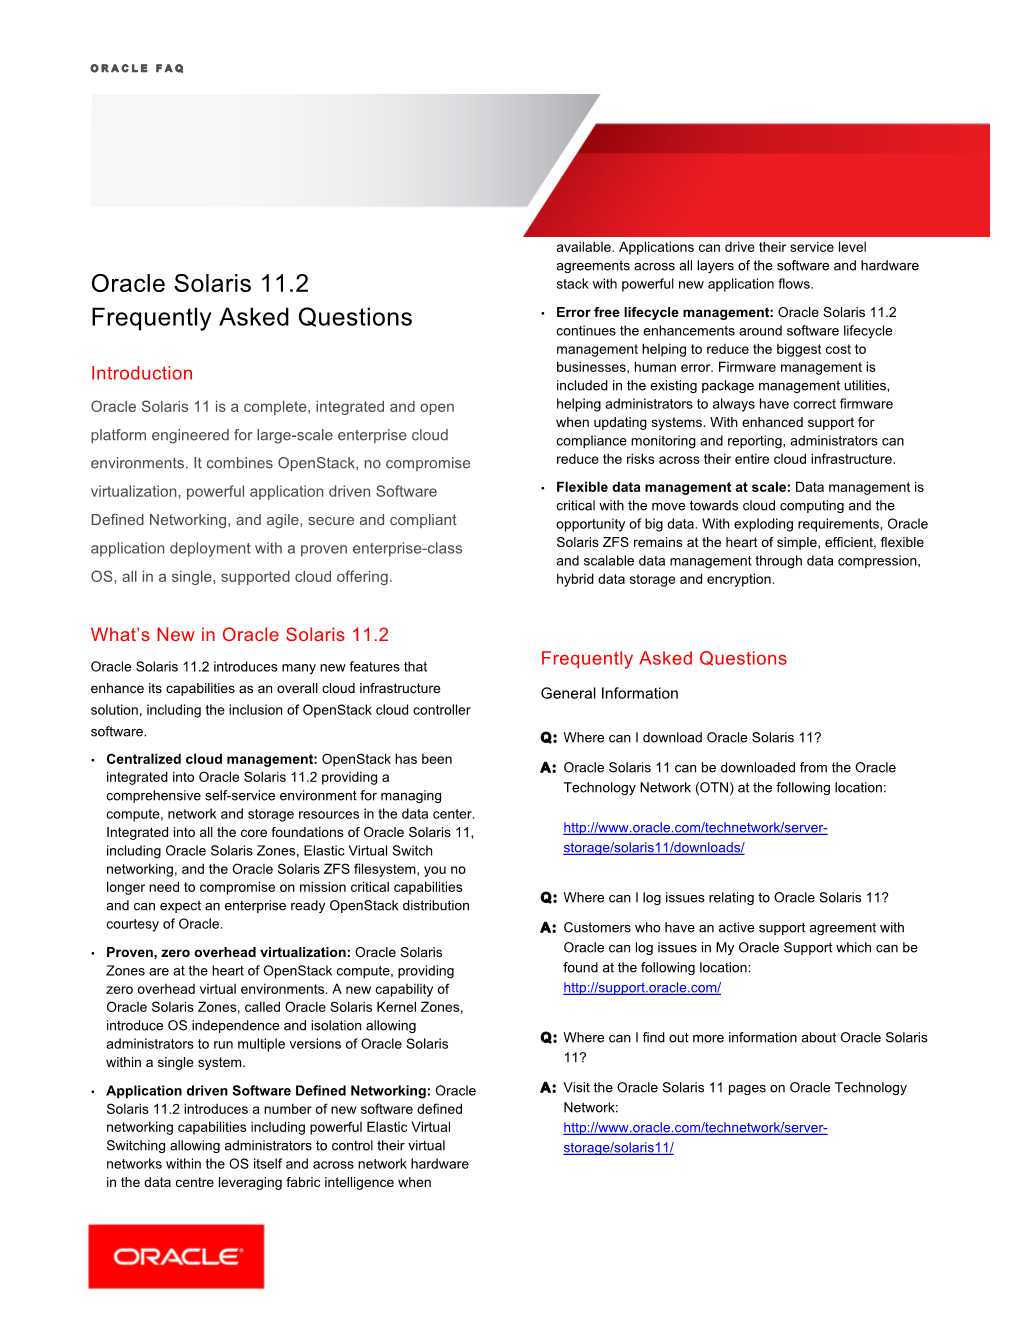 Oracle Solaris 11.2 Frequently Asked Questions (FAQ)